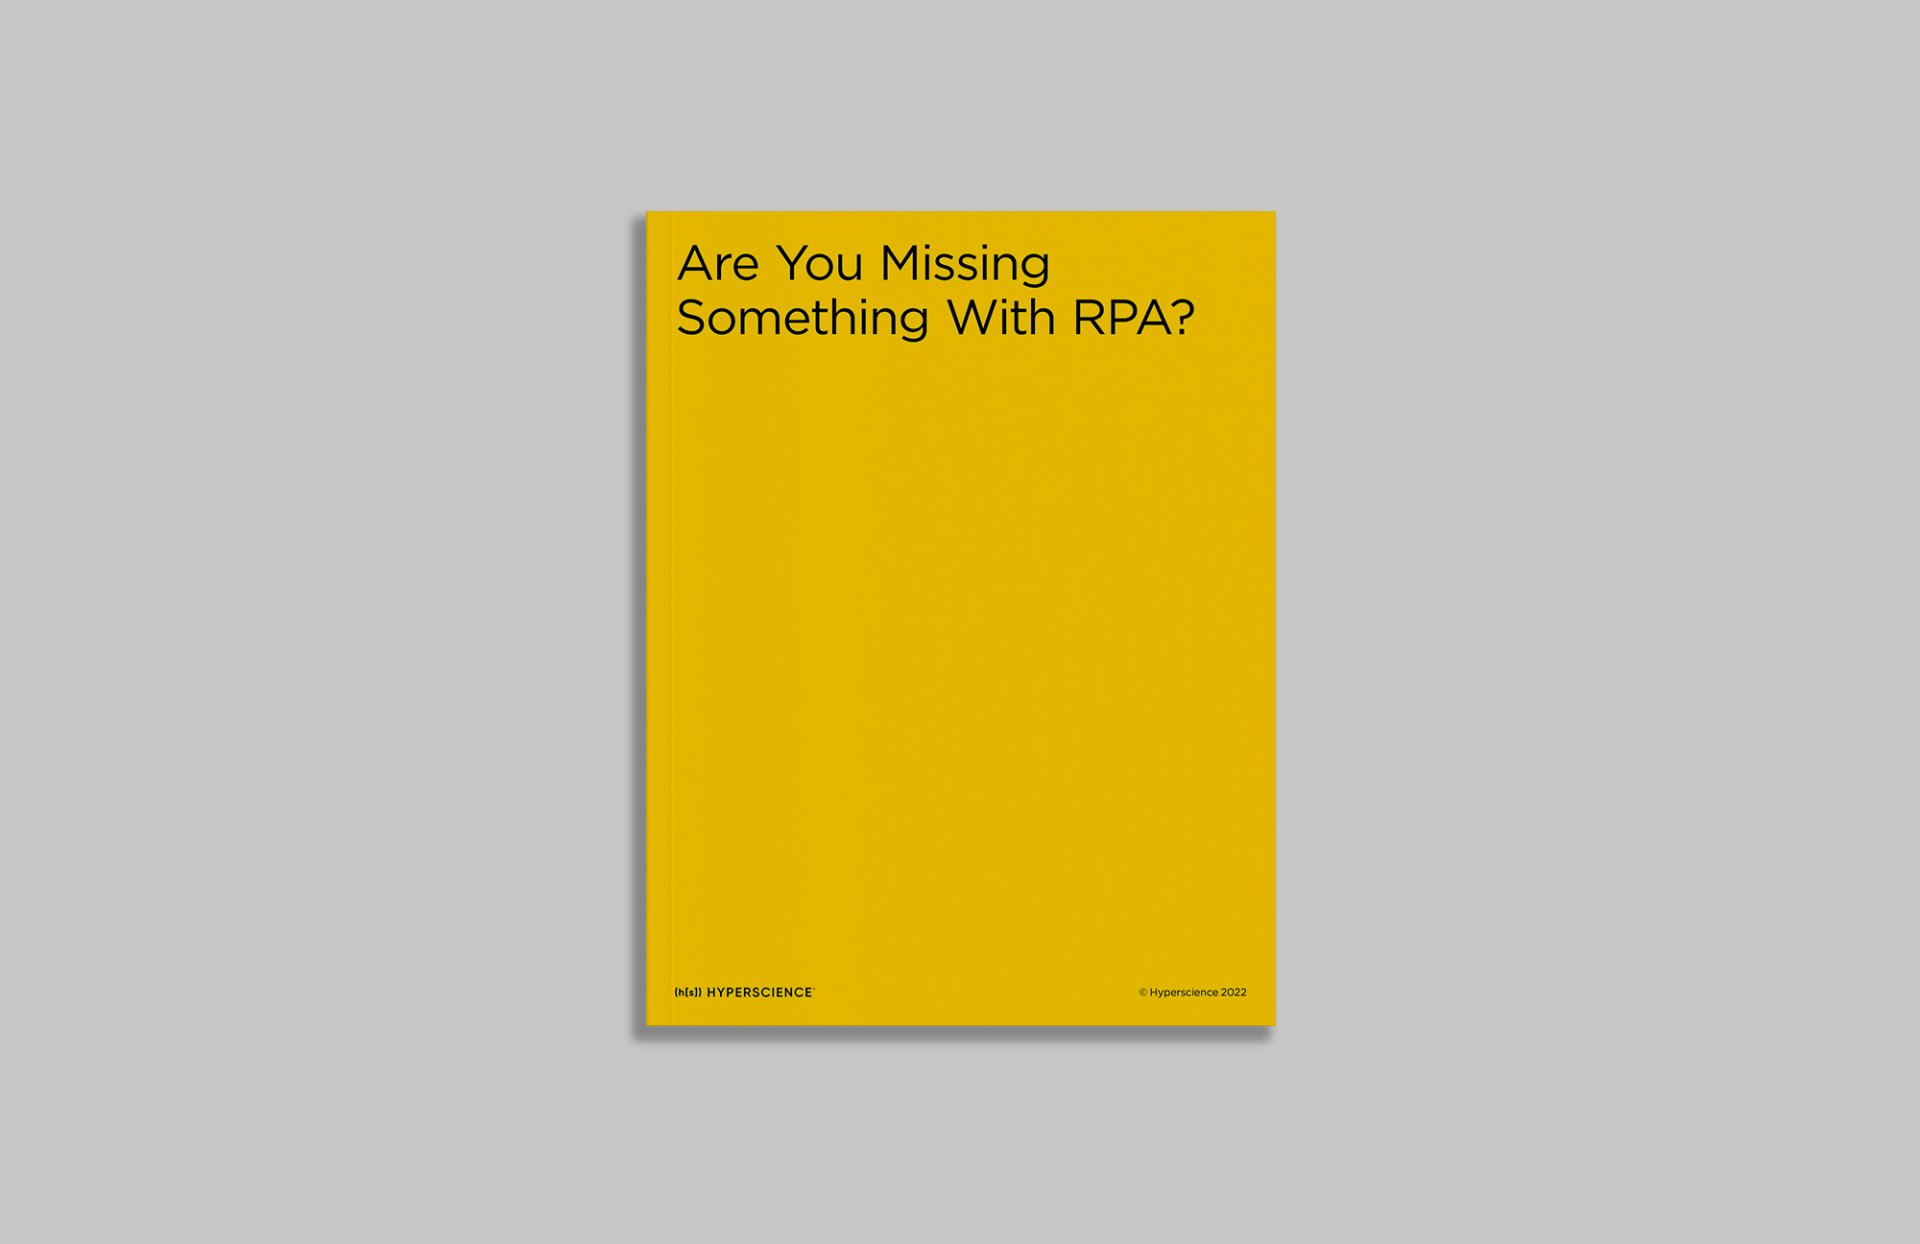 Are You Missing Something with RPA?